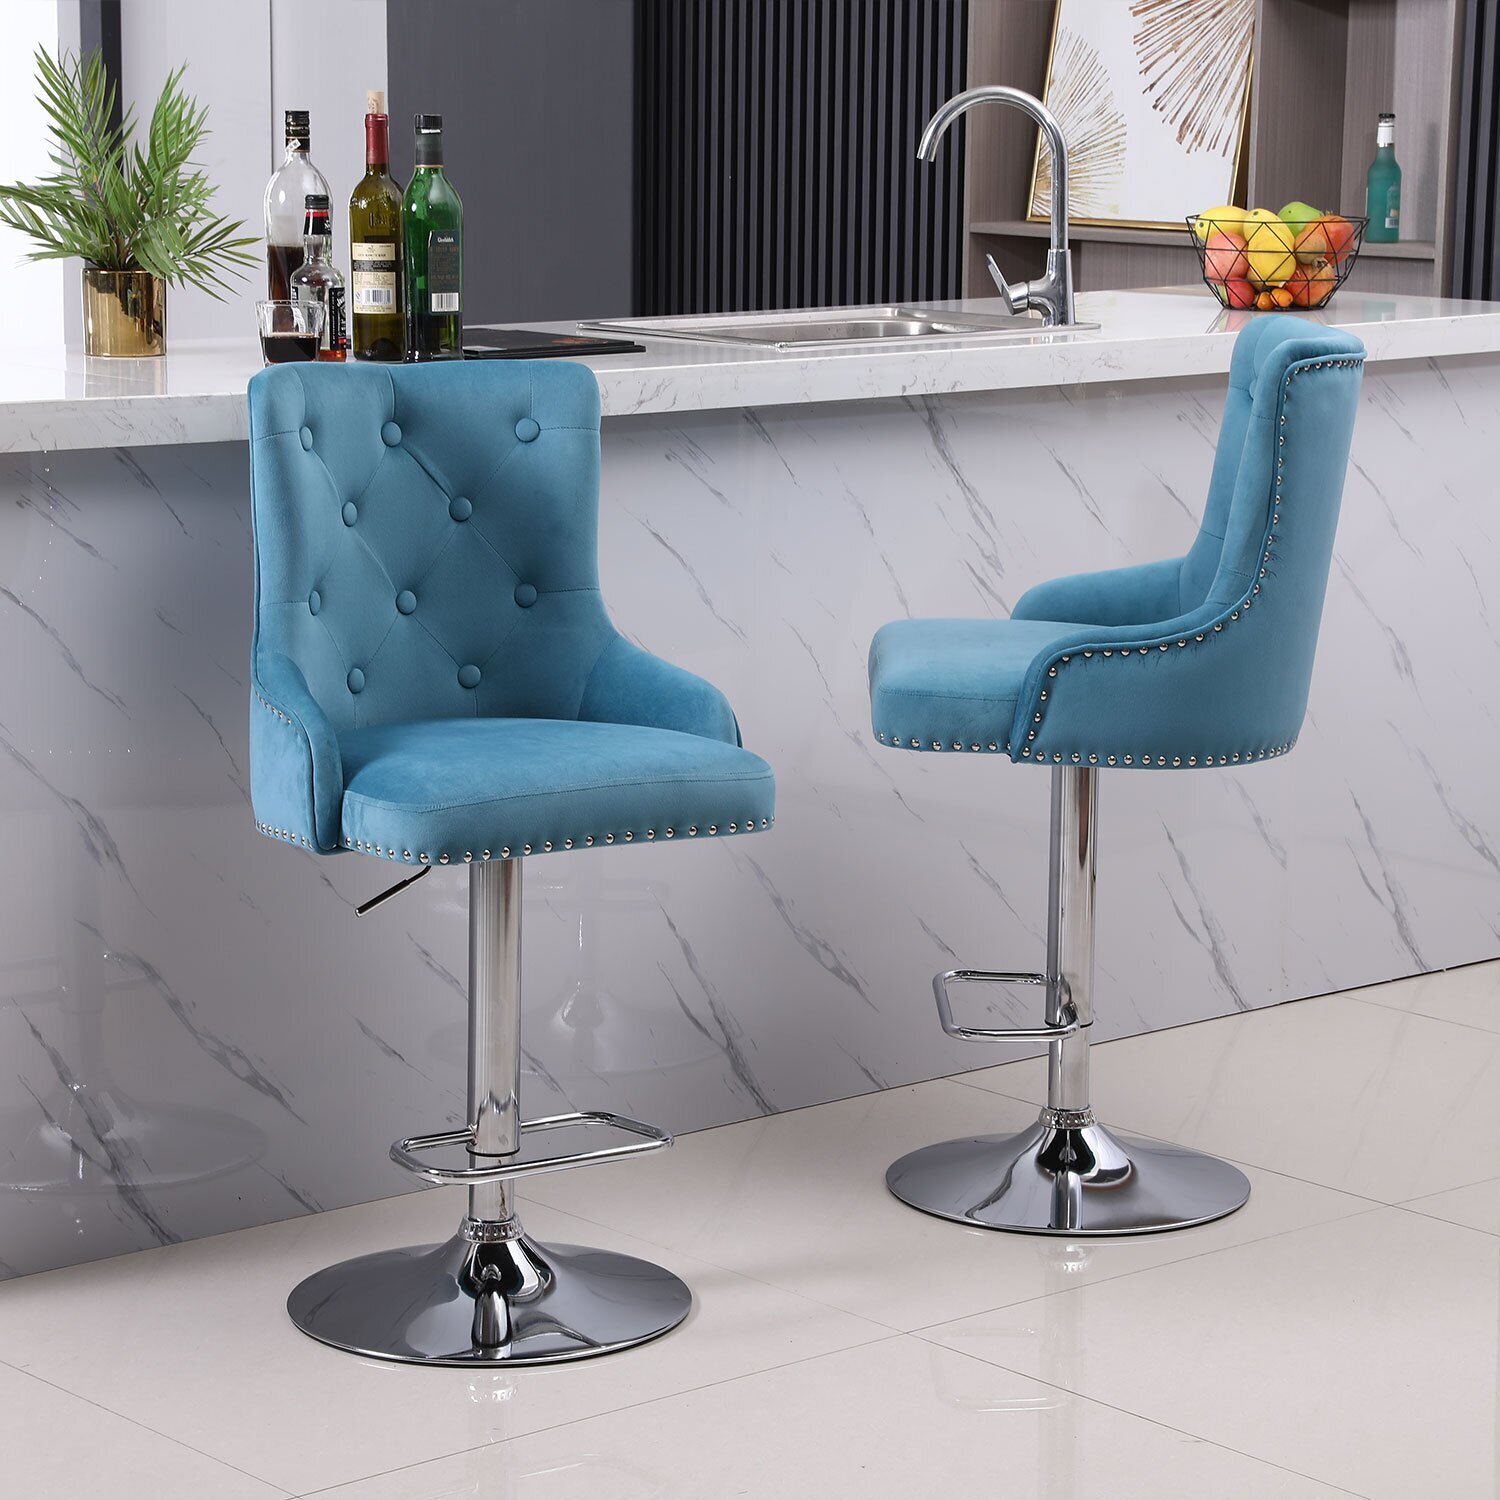 Sit in the Lap of Luxury with Rich Velvet Bar Stools